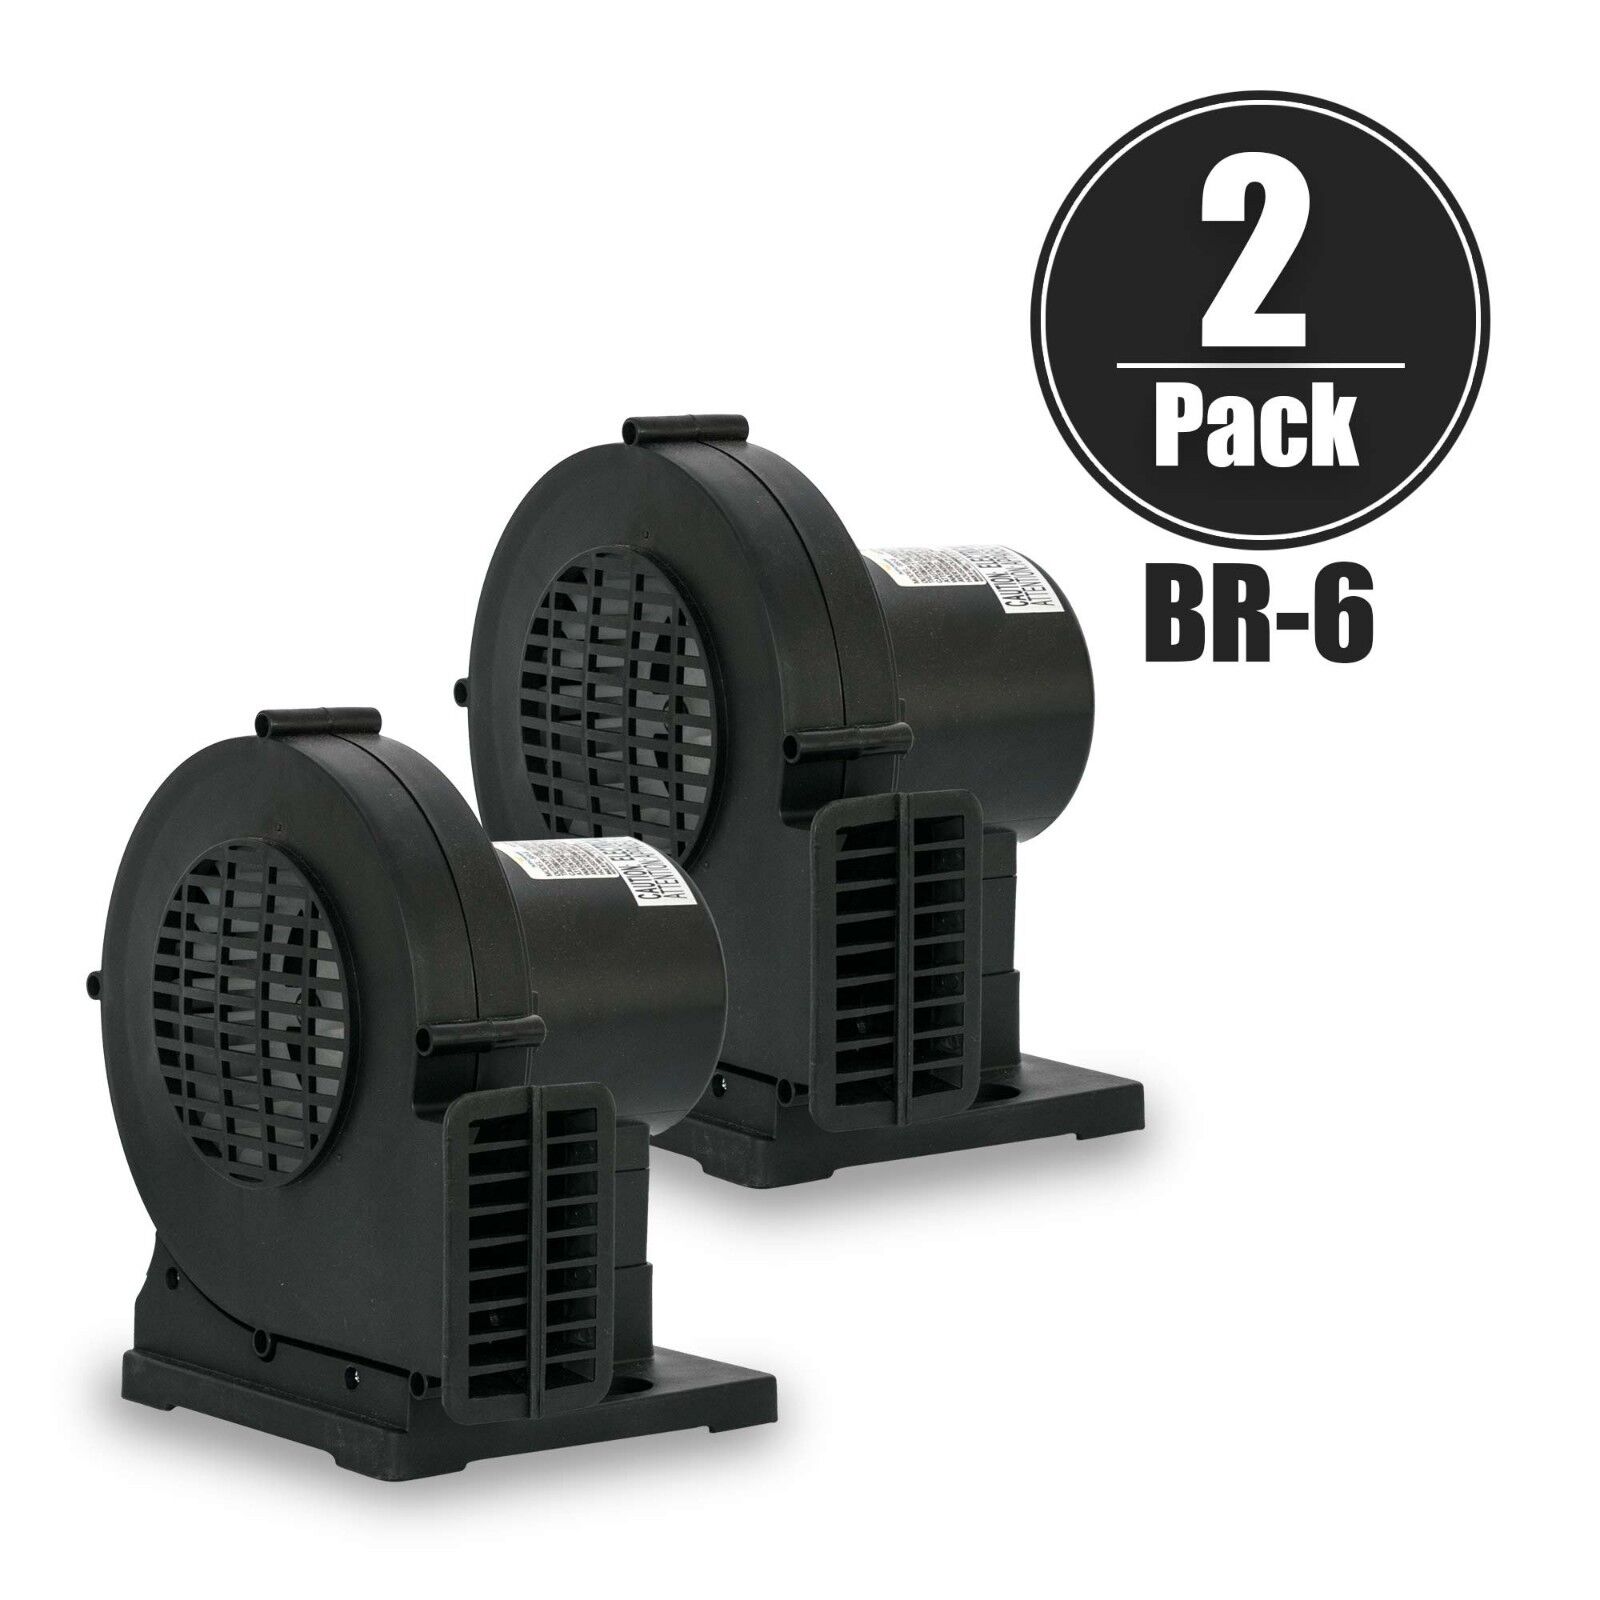 XPOWER BR-6 1/8 HP Indoor Outdoor Holiday Decoration Inflatable Blower 2 Pack